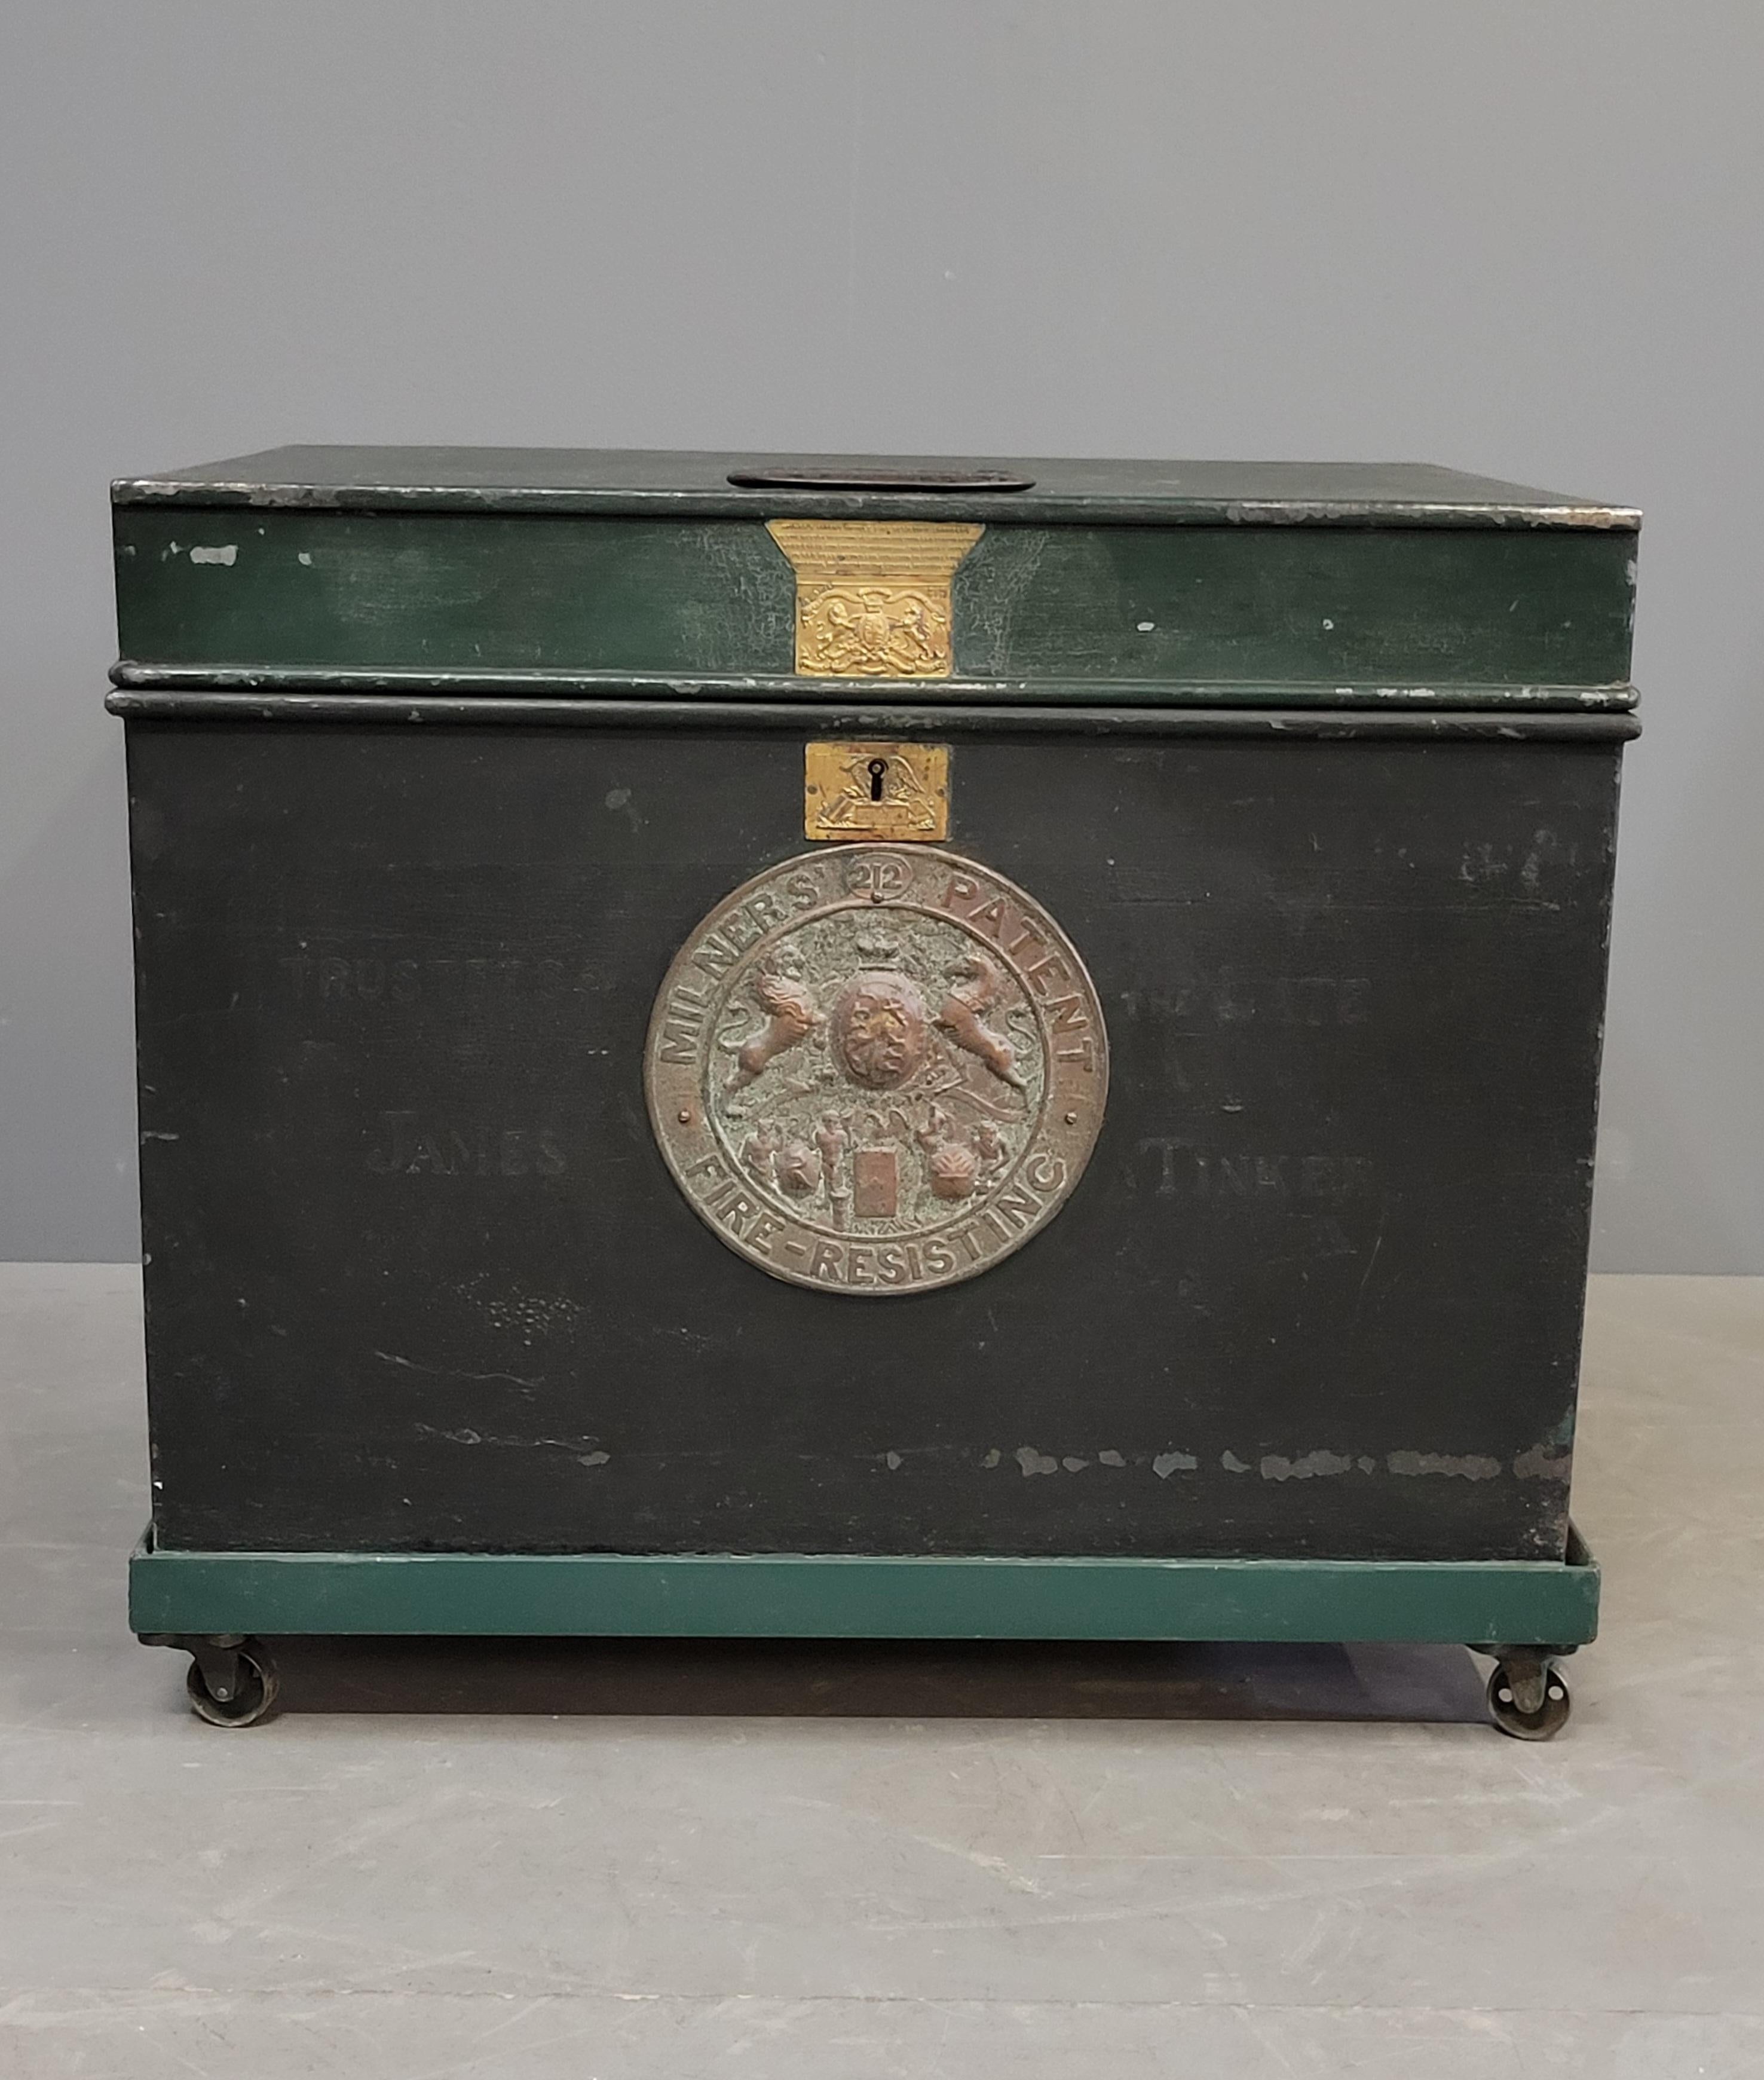 Antique late 1800s English iron Milner's Patent Fire Resisting Safe painted a gorgeous dark green with painted aqua interior. Gorgeous embossed brass circular plate and key plate with the English lion and unicorn crest. Milner's advertising sheet